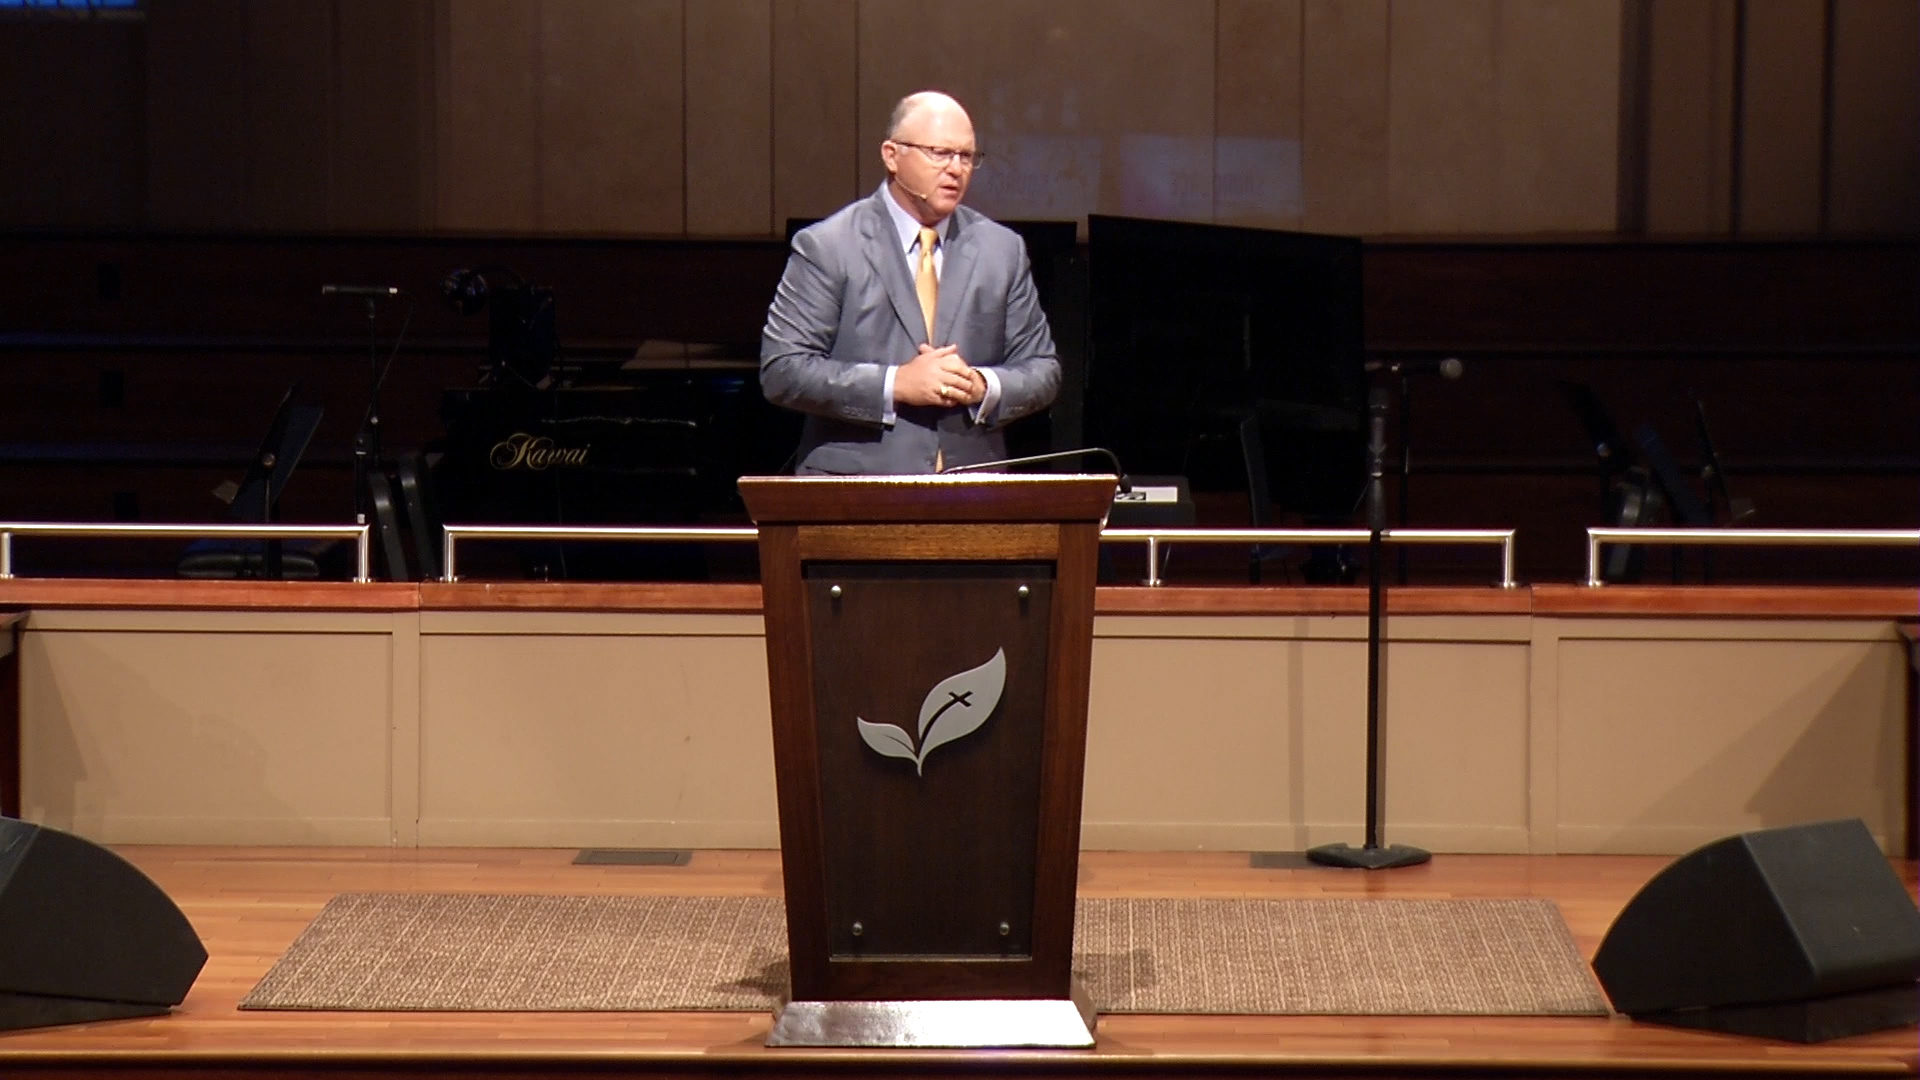 Pastor Paul Chappell: Jesus Can Provide